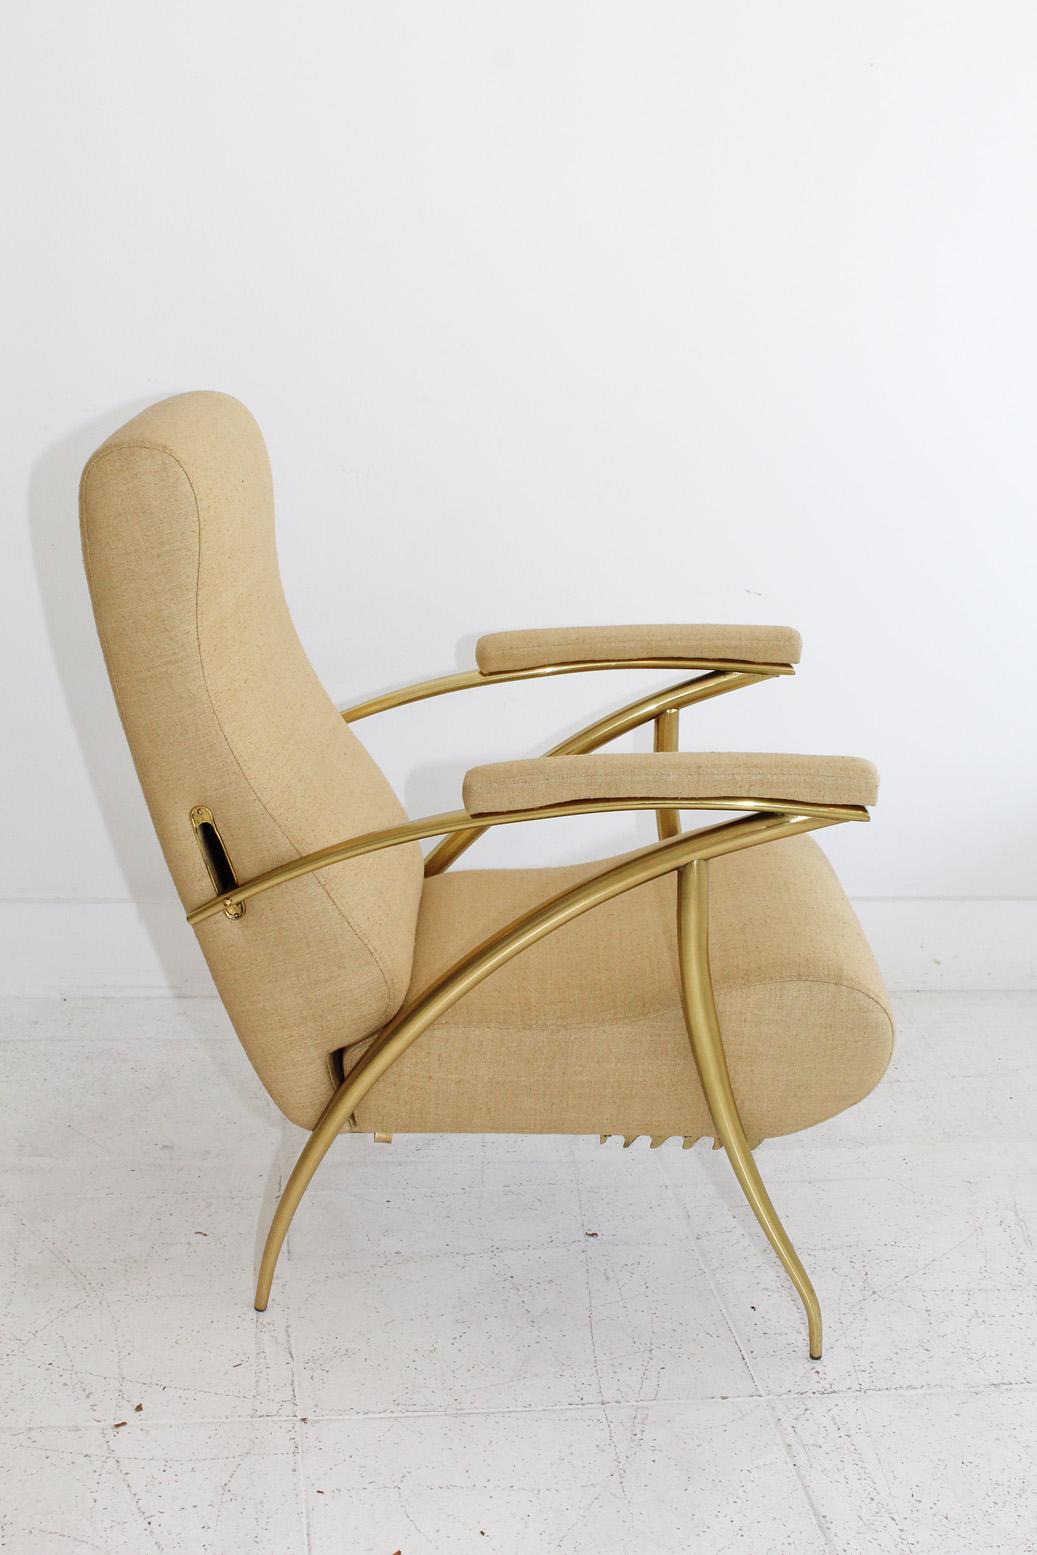 Our rare fully restored circa 1957 Italian reclining chair designed by Alberto Gambetta has a polished brass frame, wheat-colored woven silk upholstery, and four adjustable settings.